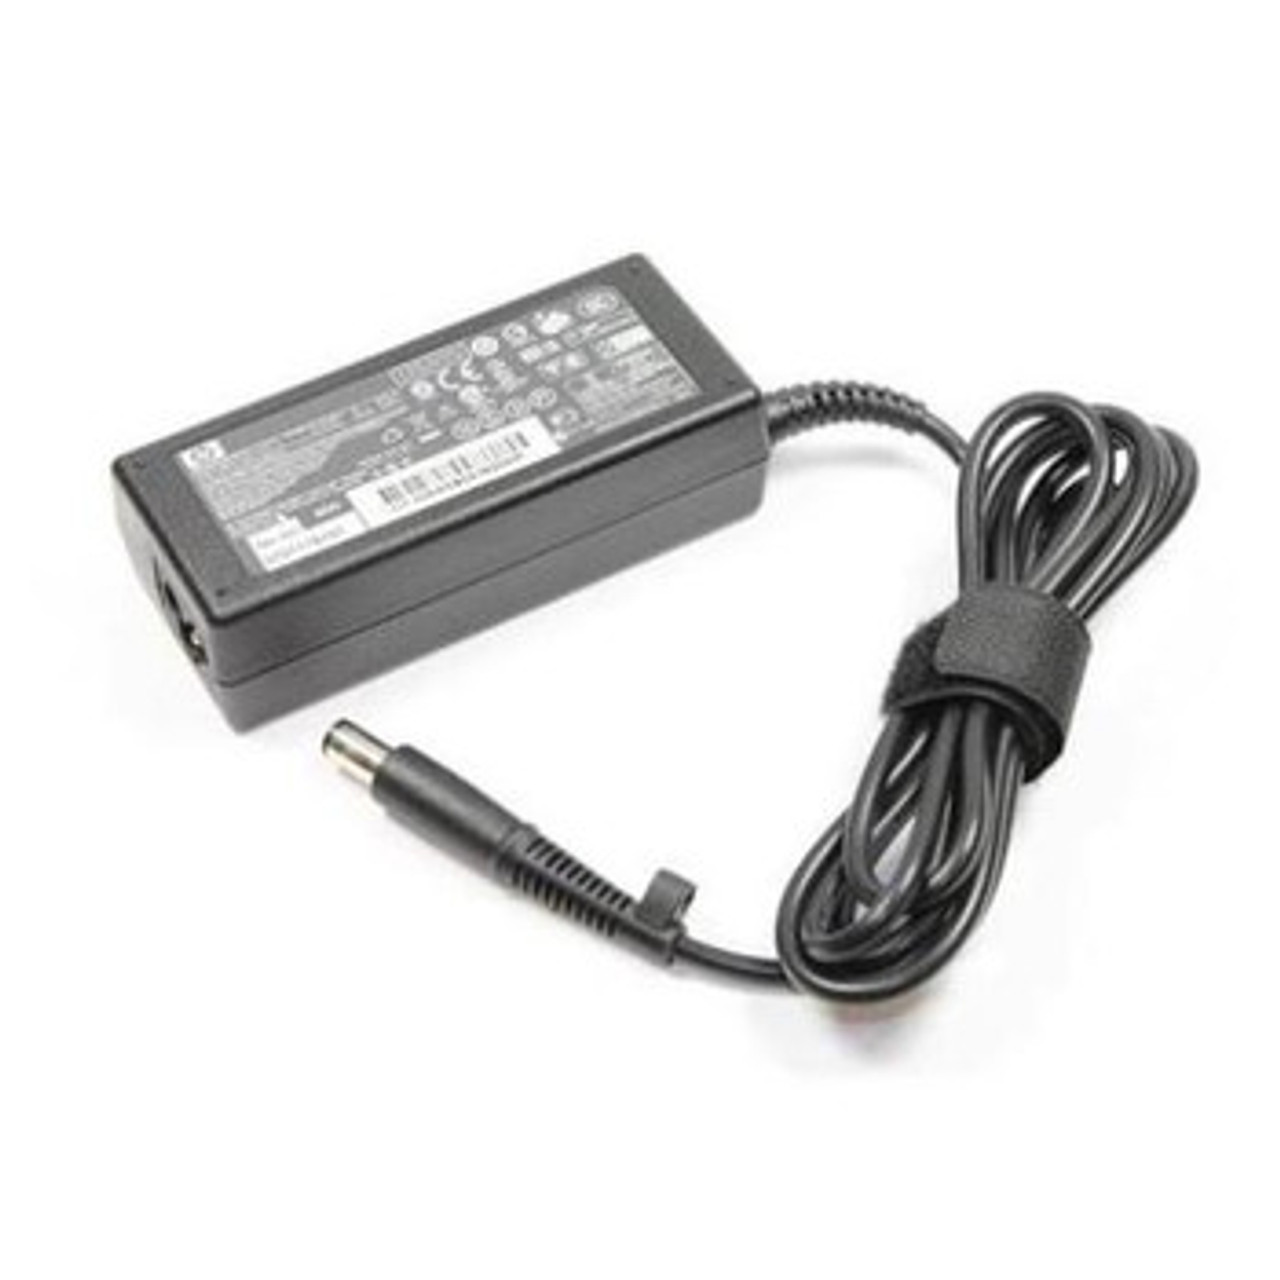 698471-001 | HP | 90-Watts 49.5V 4.62A Slim Smart Combo AC Adapter for Notebook PCs